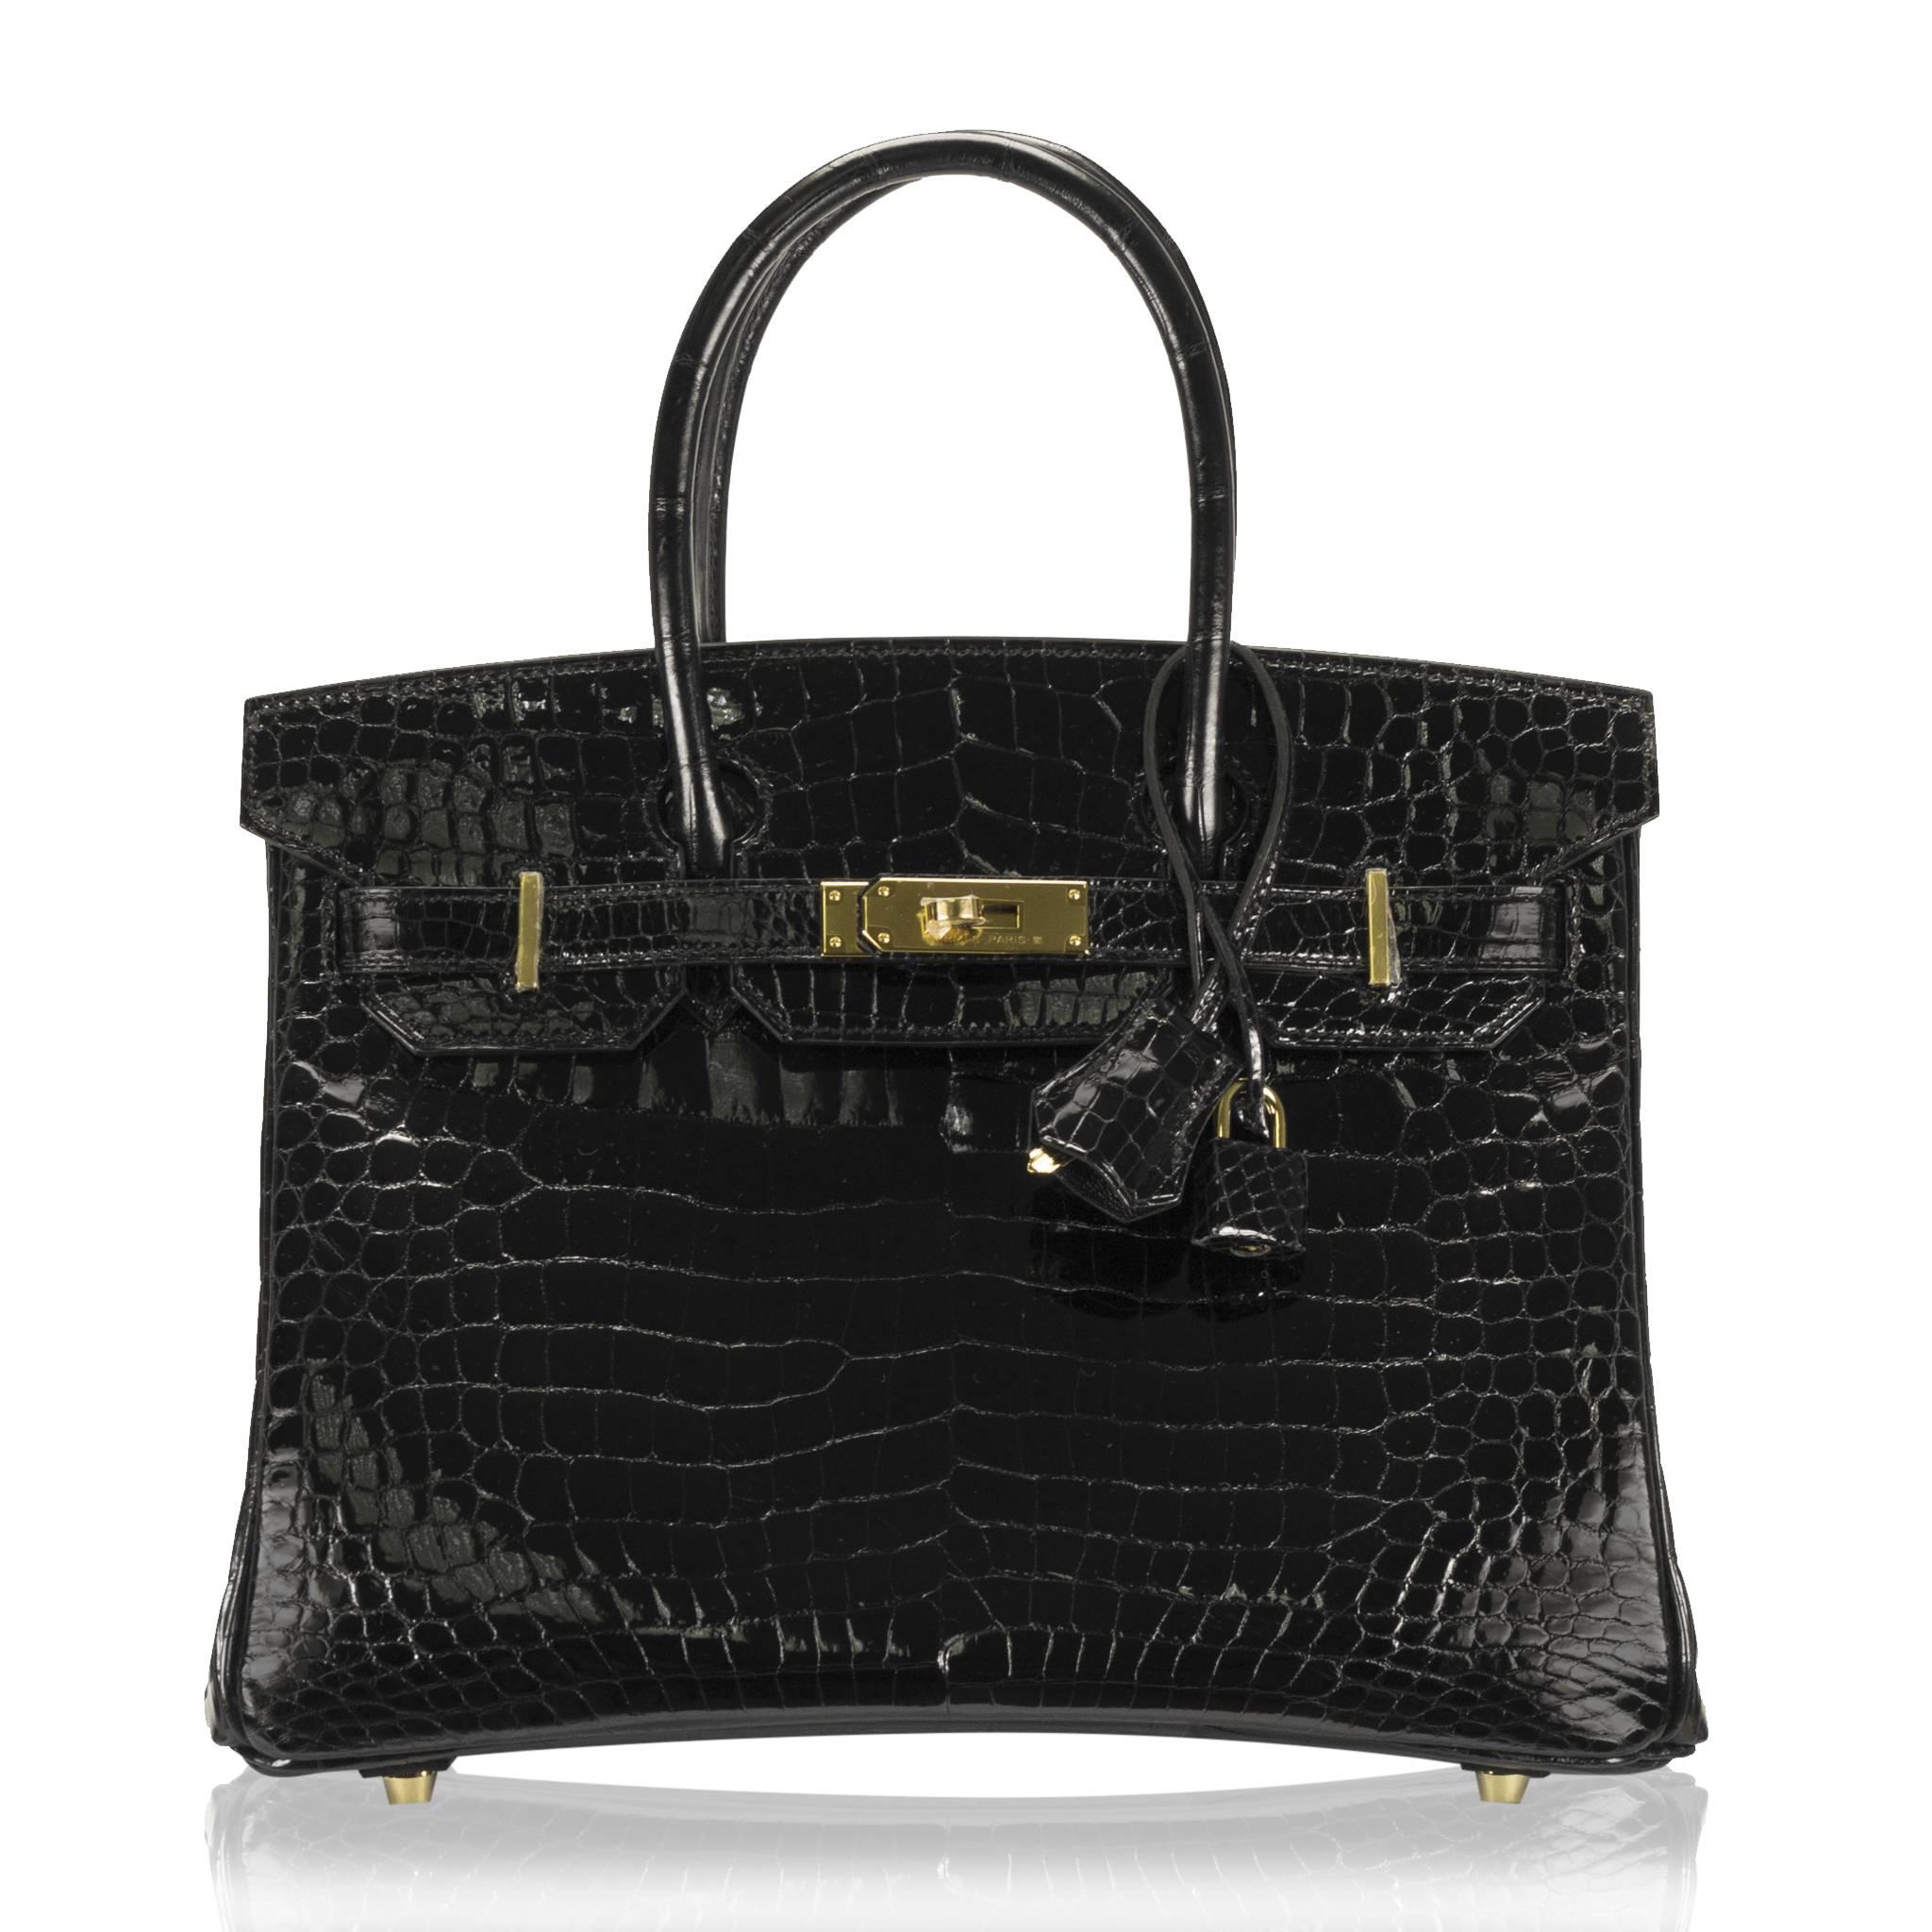 Hermes Birkin 30 Crocodilus Porosus Leather Black Shiny Color GHW 2017

Pristine condition. Pre-owned and never used.

Bought it in Hermes store in 2017.

Model: Birkin 30.

Composition: Crocodilus Porosus Leather.

Size:  11.81 x 8.66 x 6.29 inch /